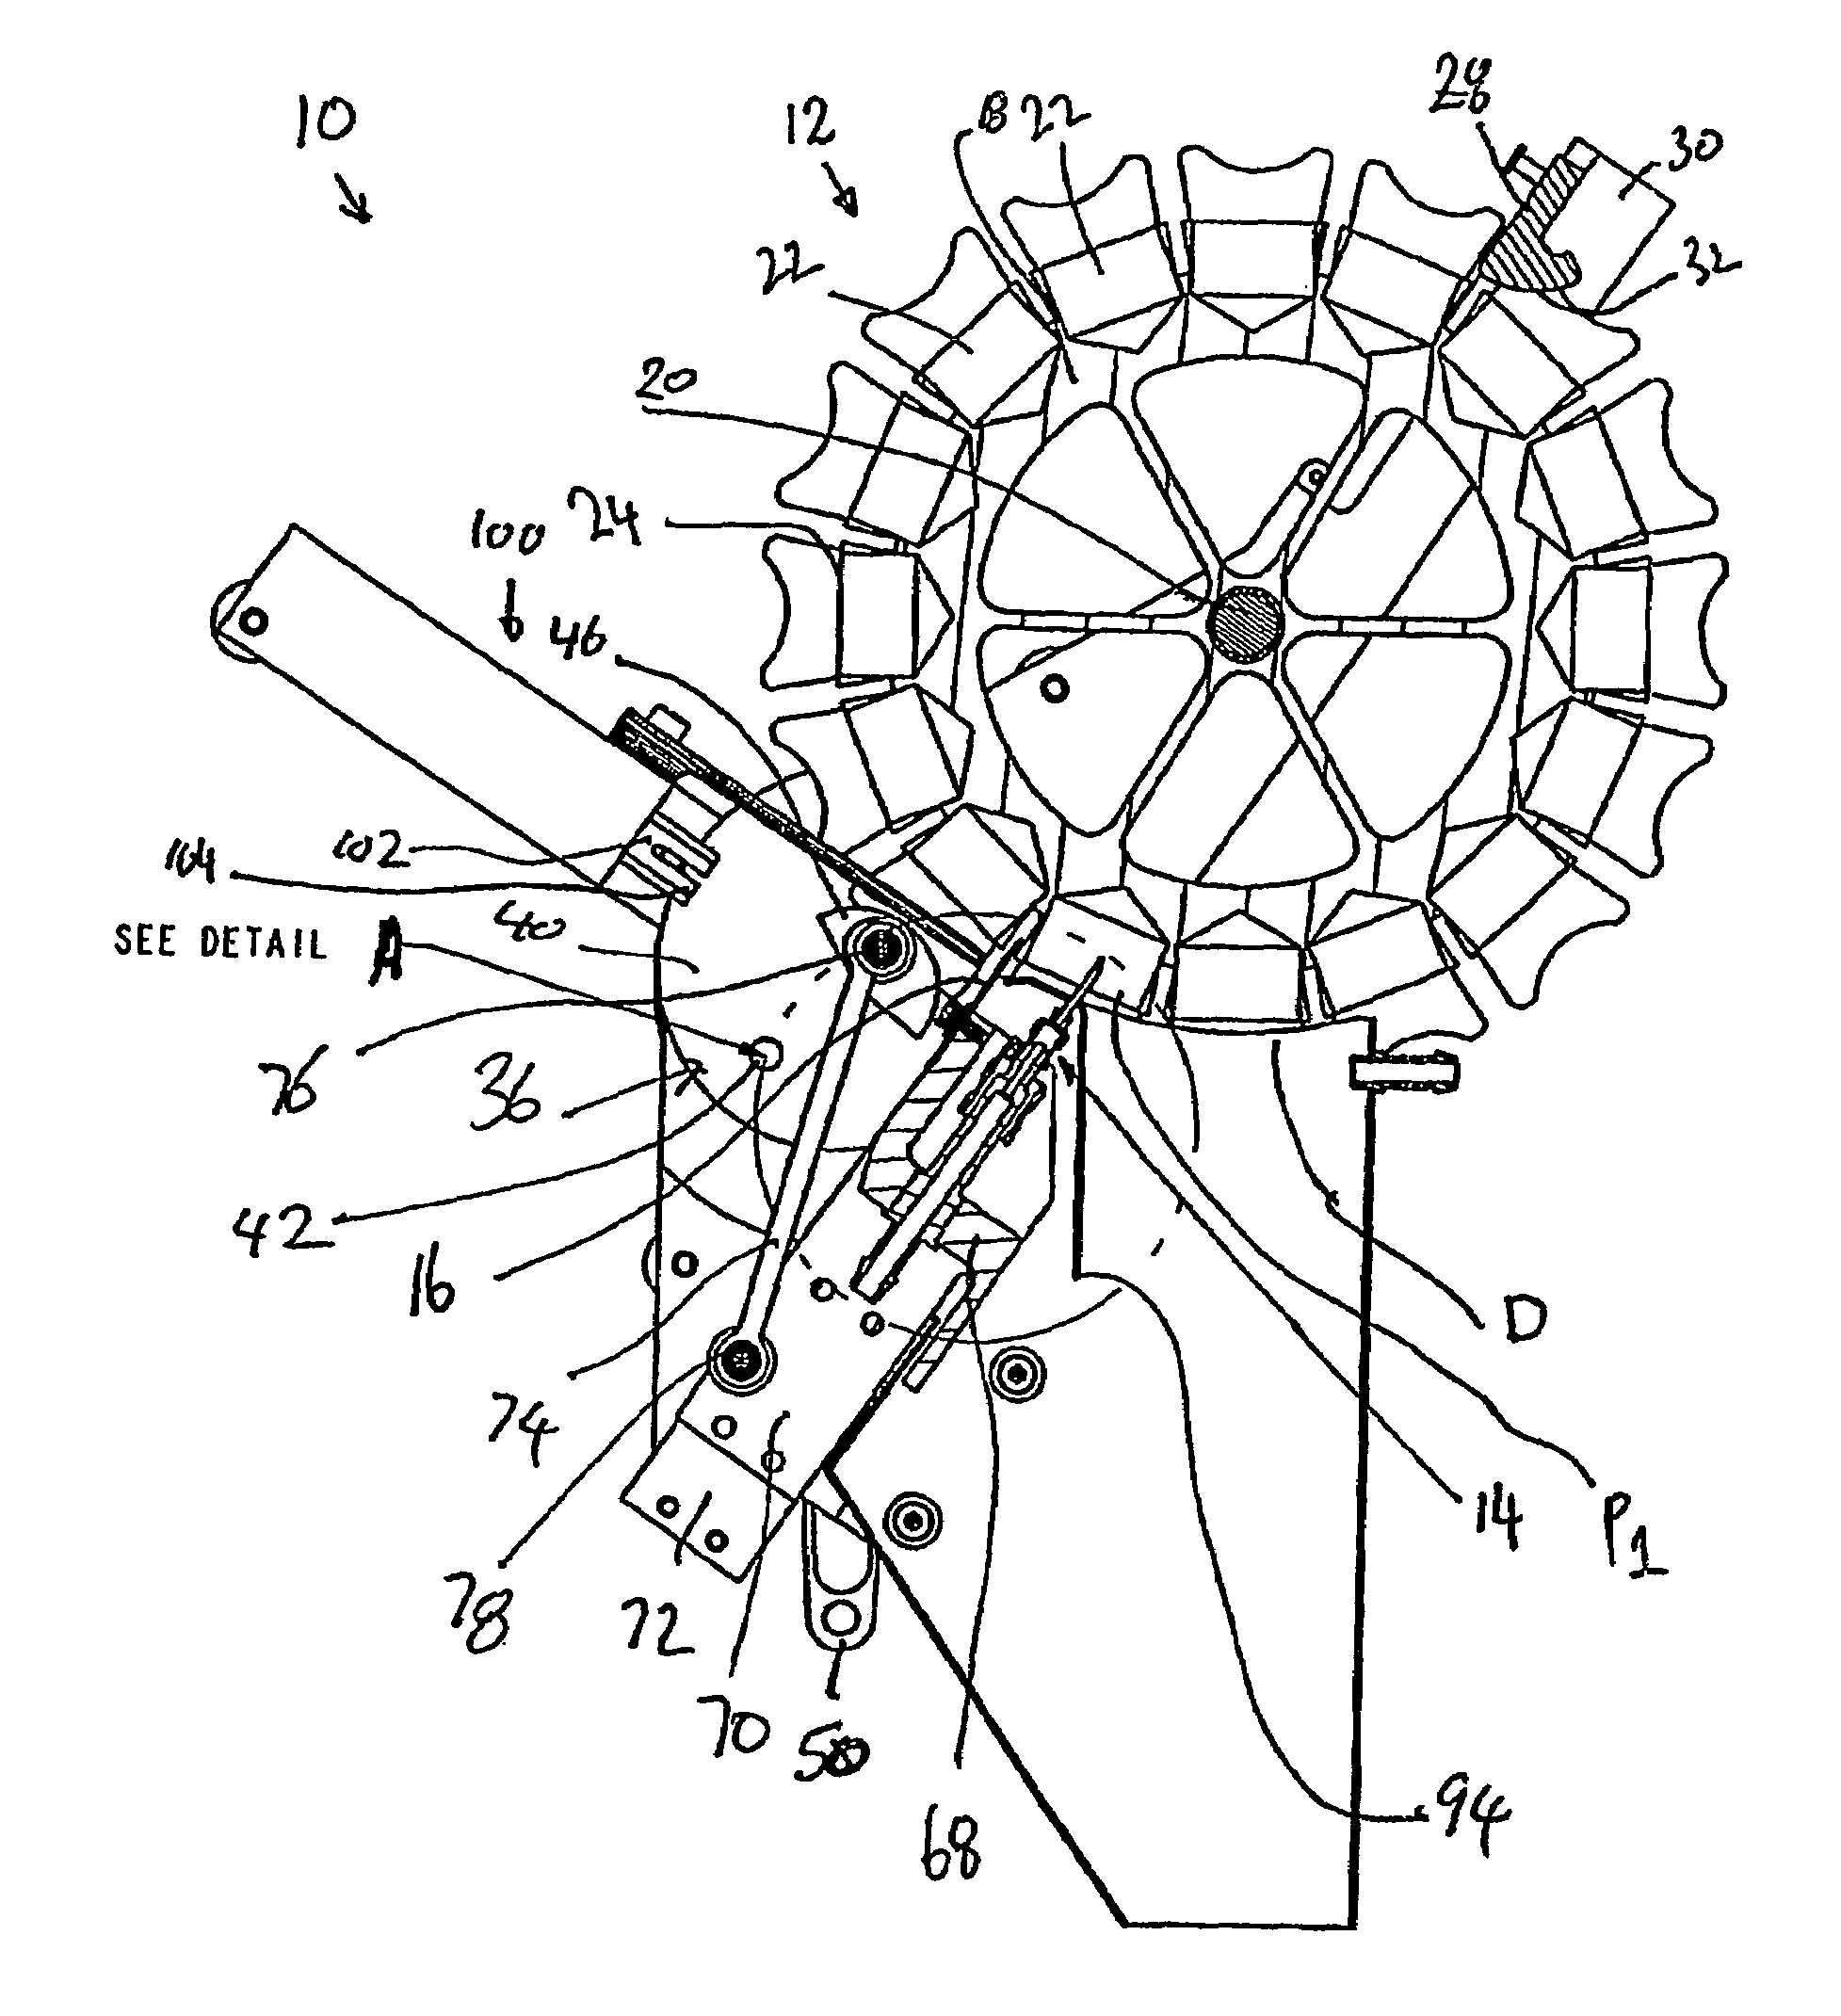 Apparatus for initiating and dispensing an incendiary